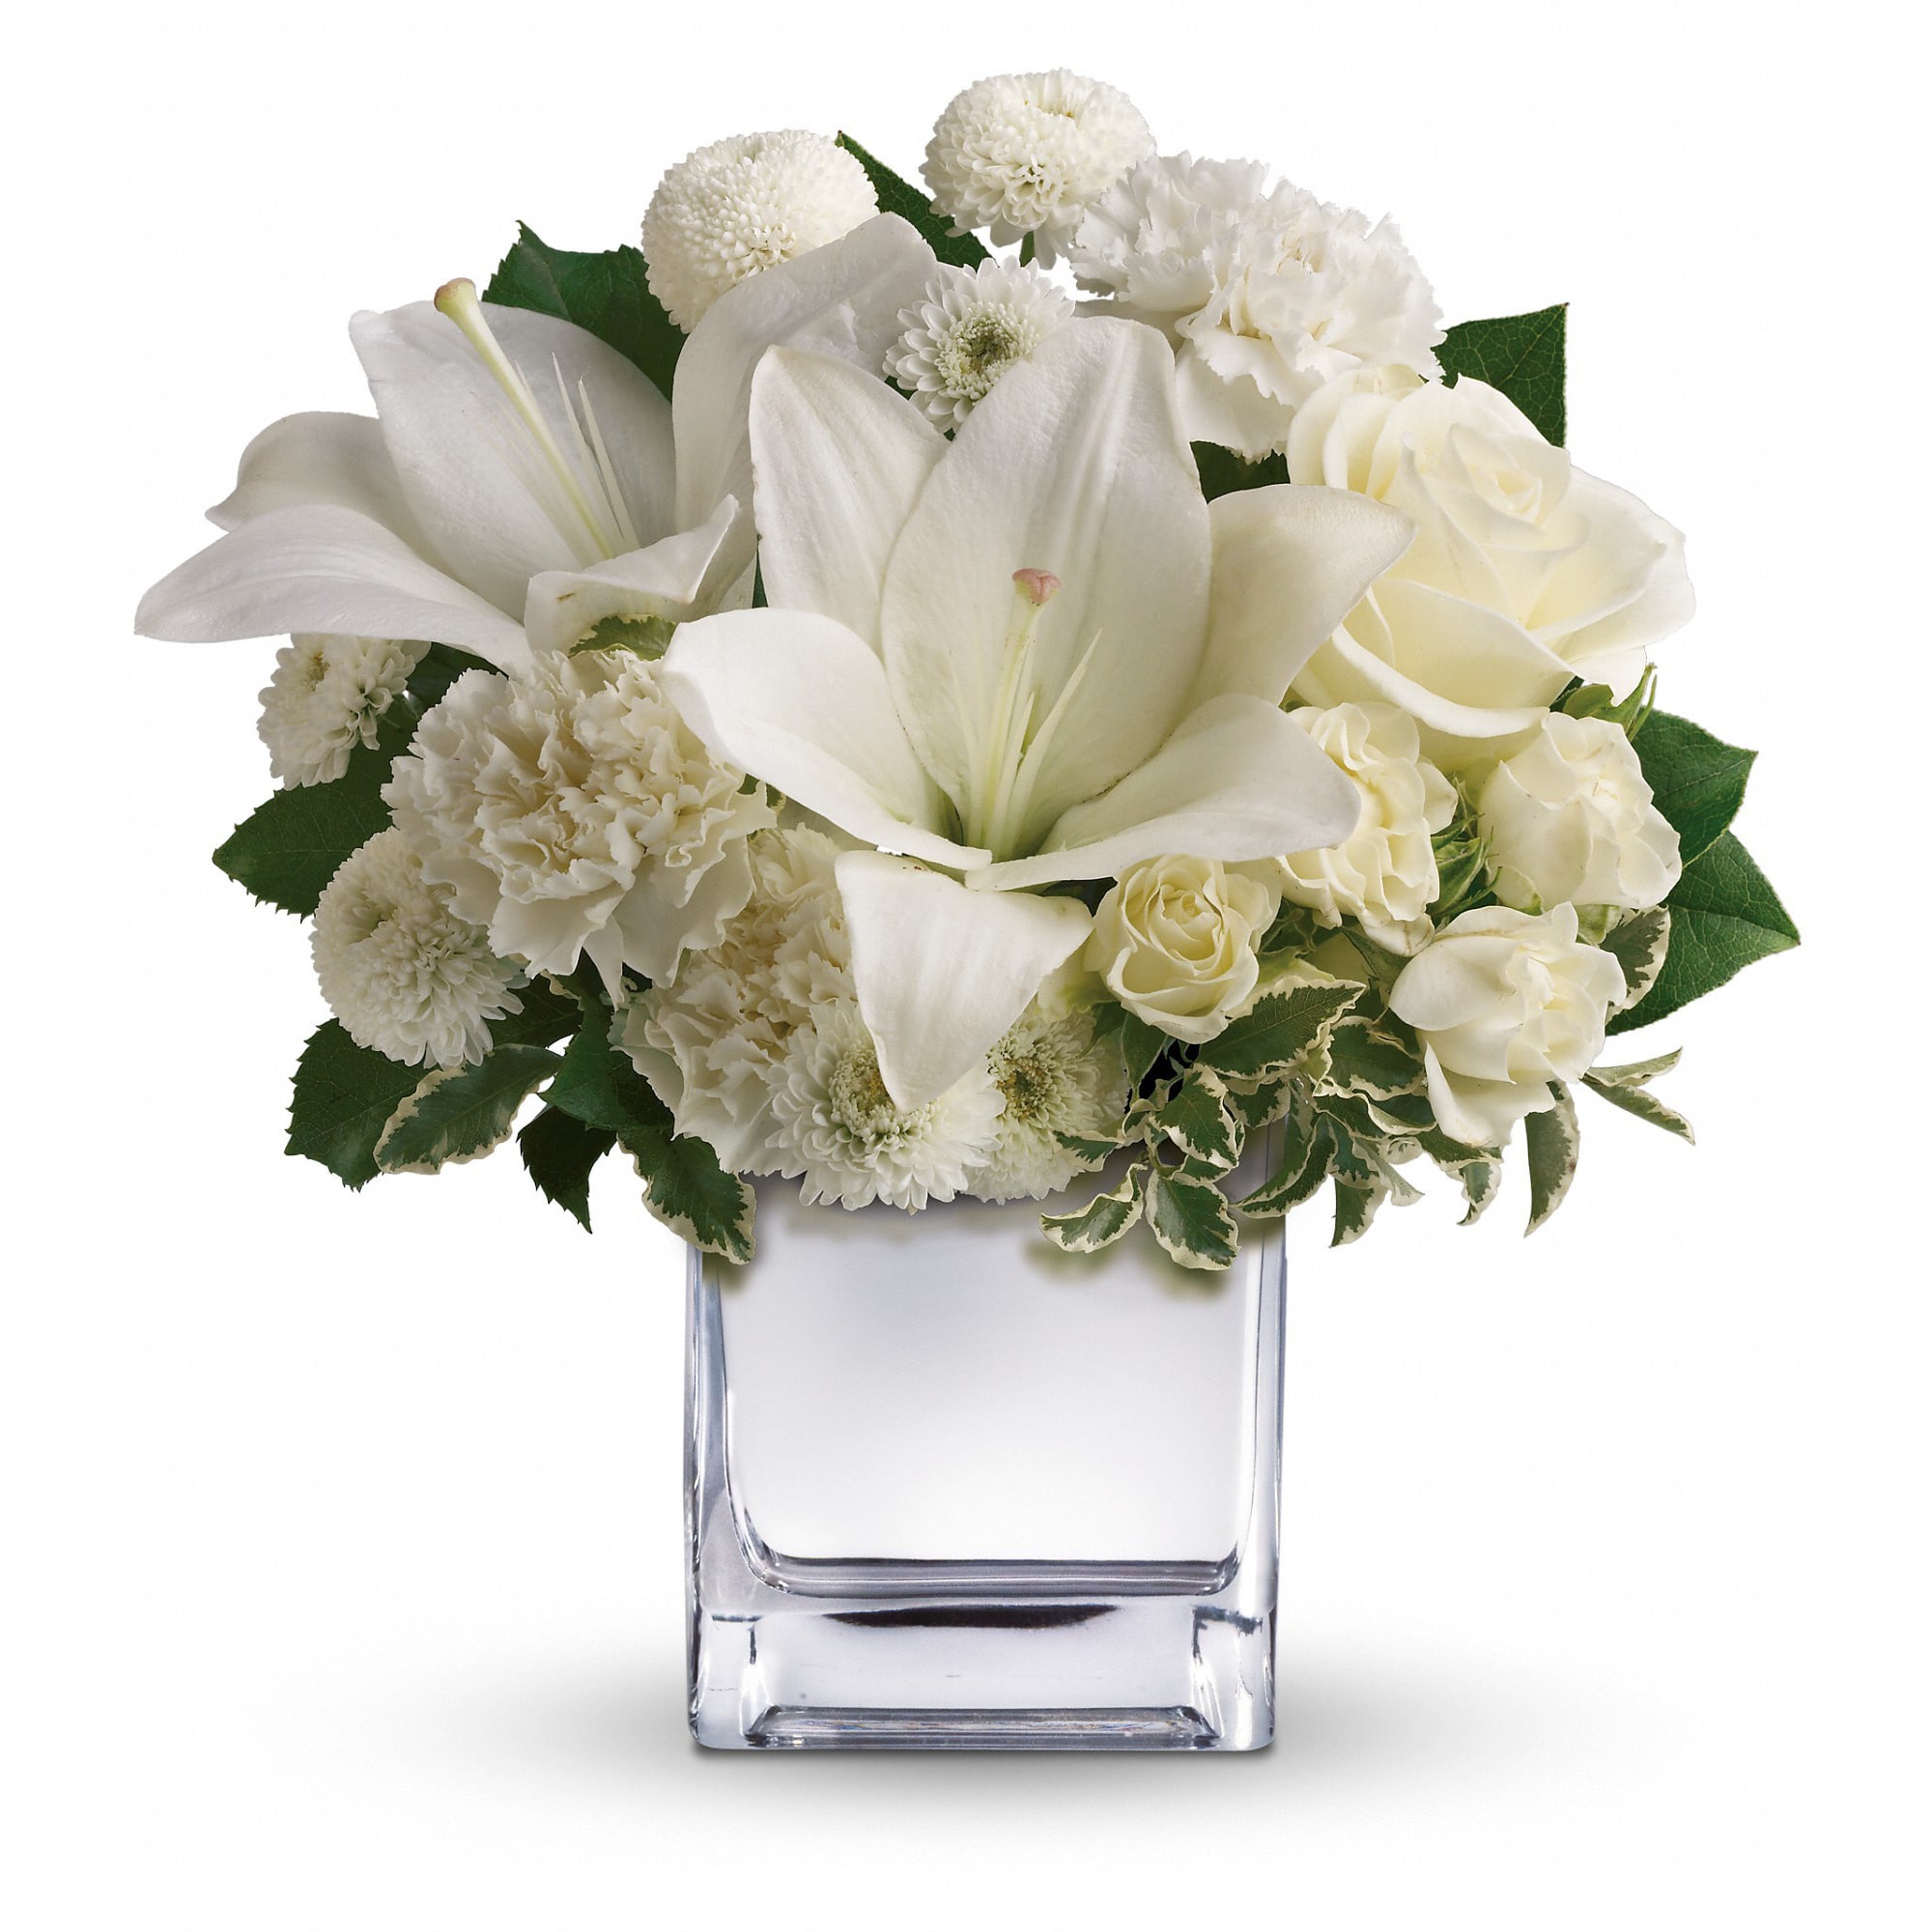 Teleflora's Peace &amp; Joy Bouquet - Surprise a faraway friend with this elegant array of Christmas flowers. White roses, lilies and other favorites are displayed in a chic mirrored silver cube. Simple and affordable, it is a lovely gift that will brighten spirits without breaking your bank.  The elegant holiday bouquet includes white roses, white Asiatic lilies, white carnations and white button spray chrysanthemums accented with assorted greenery.  Approximately 11&quot; W x 11 1/2&quot; H  Orientation: All-Around  As Shown : T408-2A Deluxe : T408-2B Premium : T408-2C